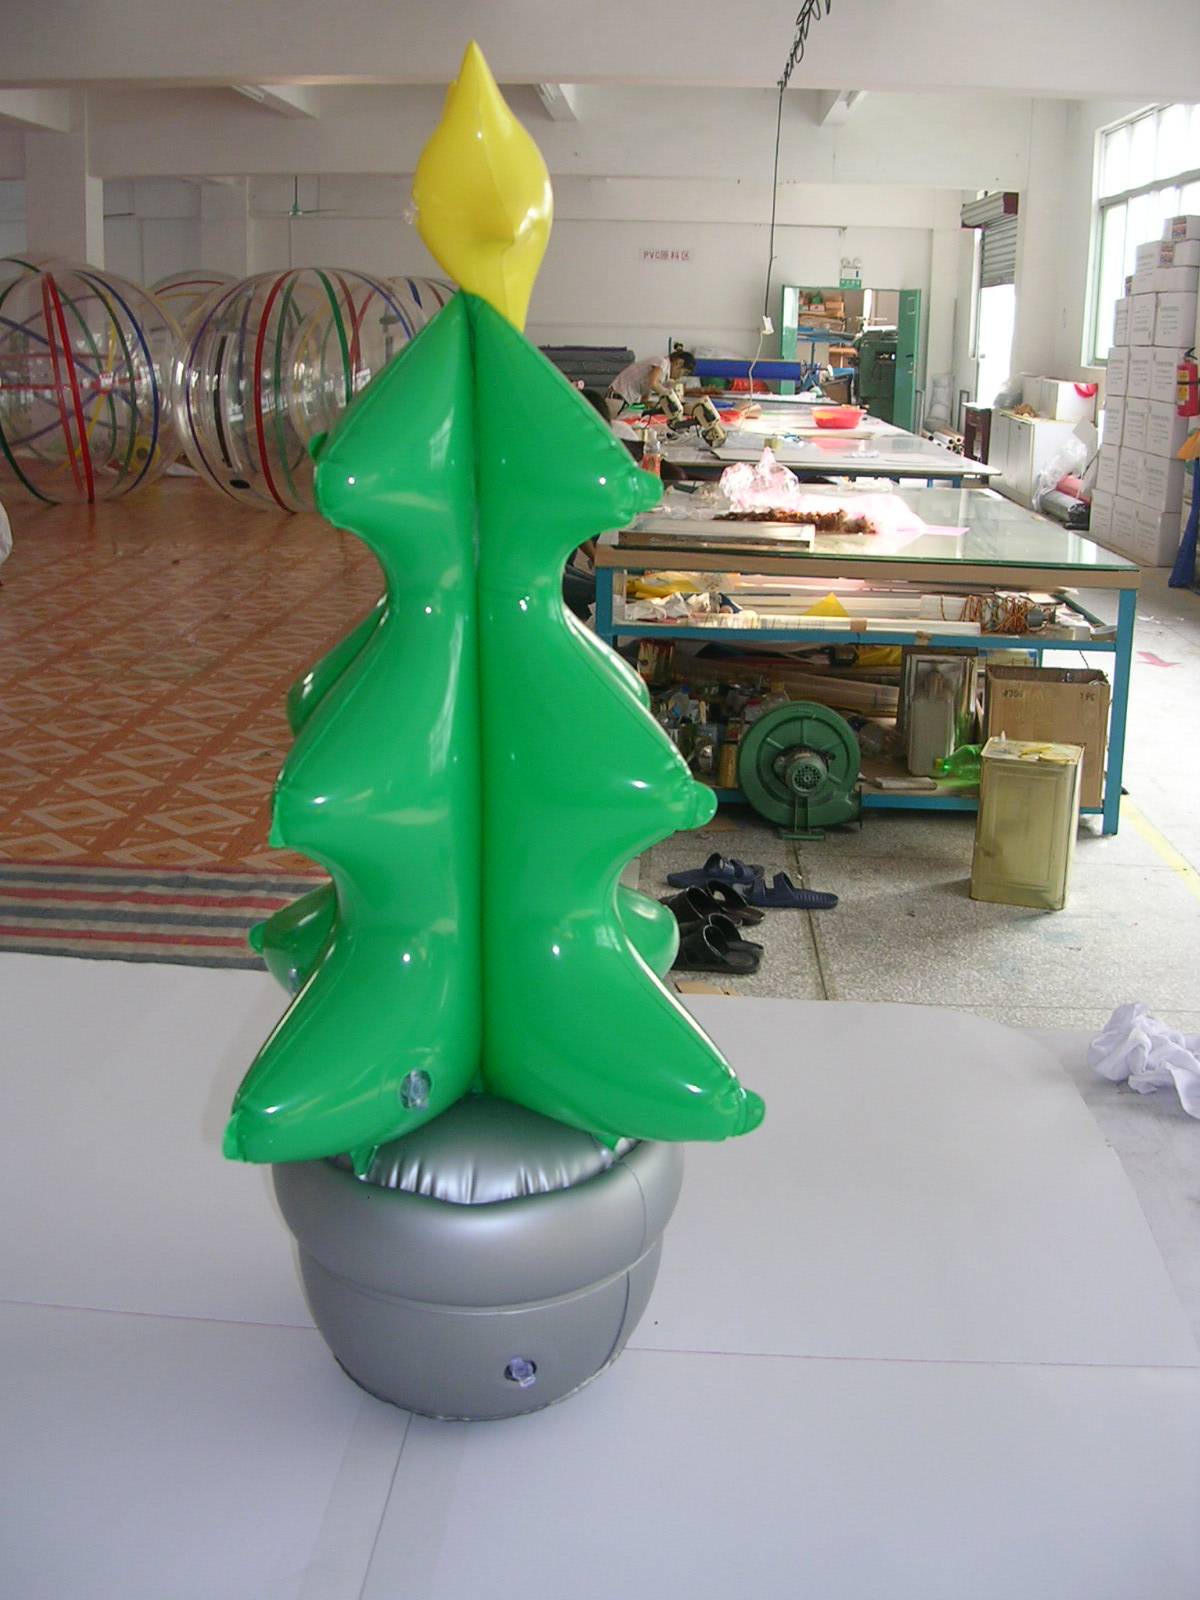 Customised Inflatable Christmas Tree For Indoor Outdoor Garden Xmas Decor Holiday Yard Lawn